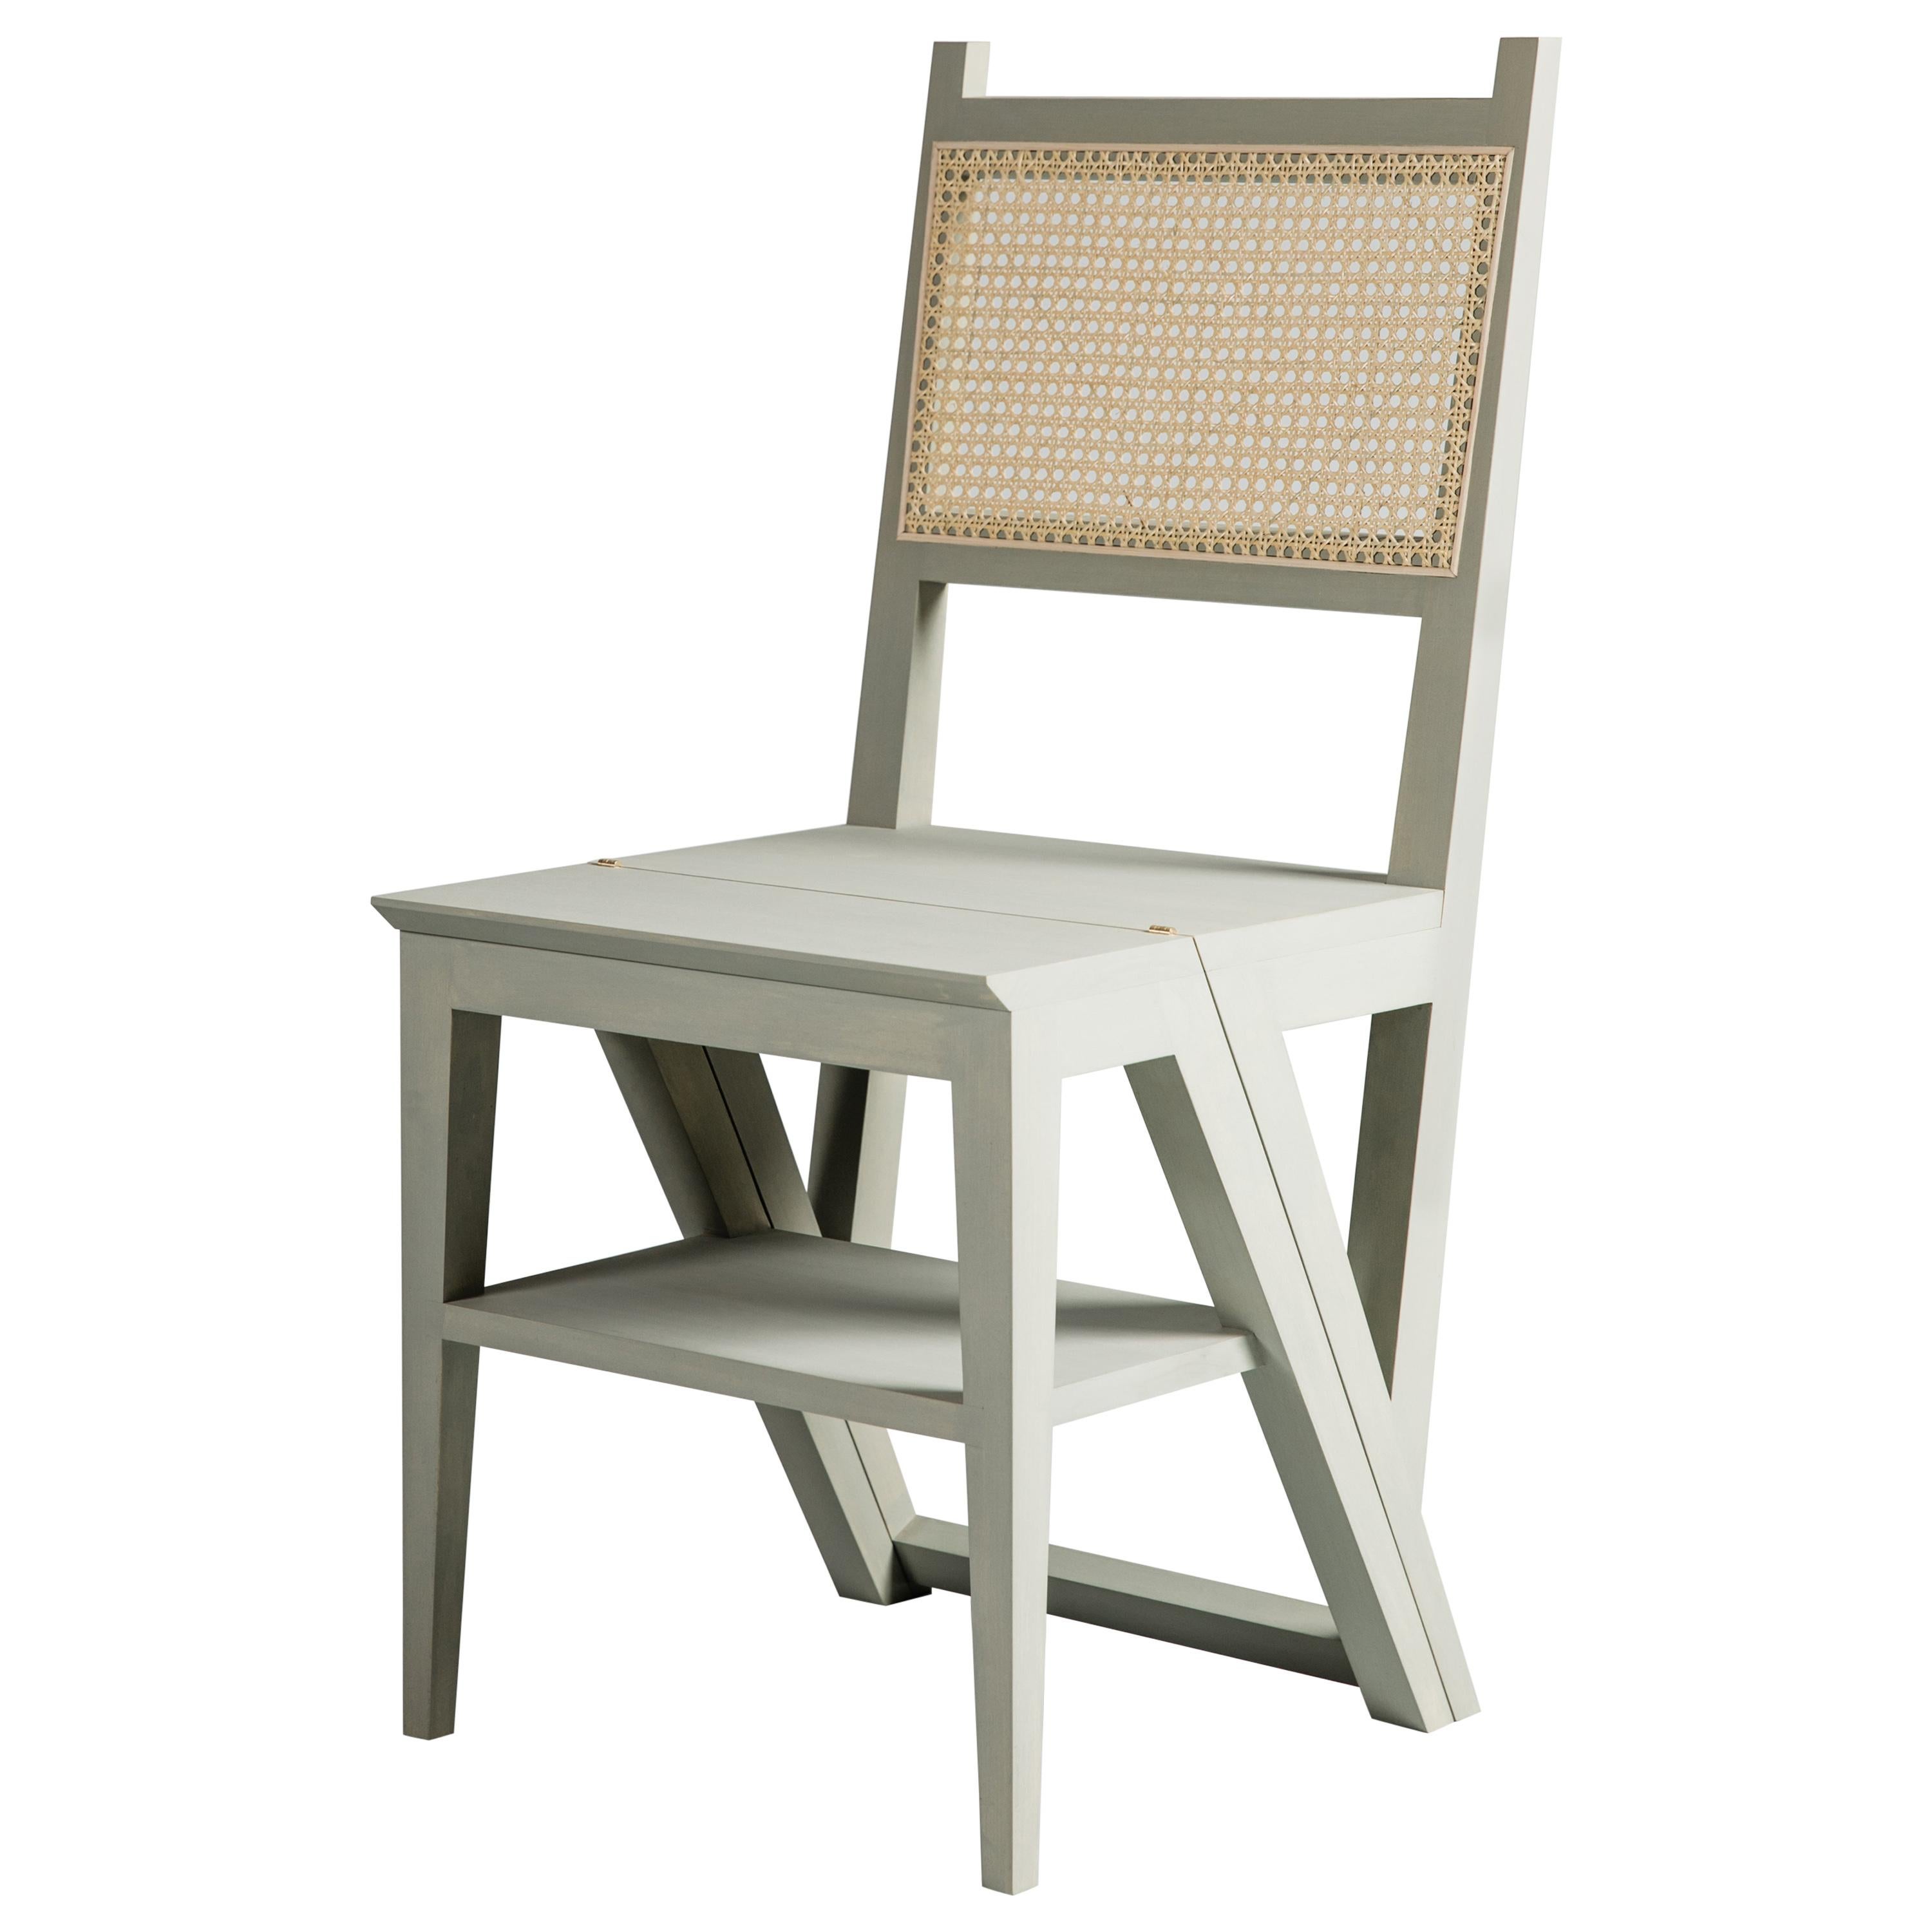 Painted Stepladder Chair Library Chair, Transforming Chair and Step Stool